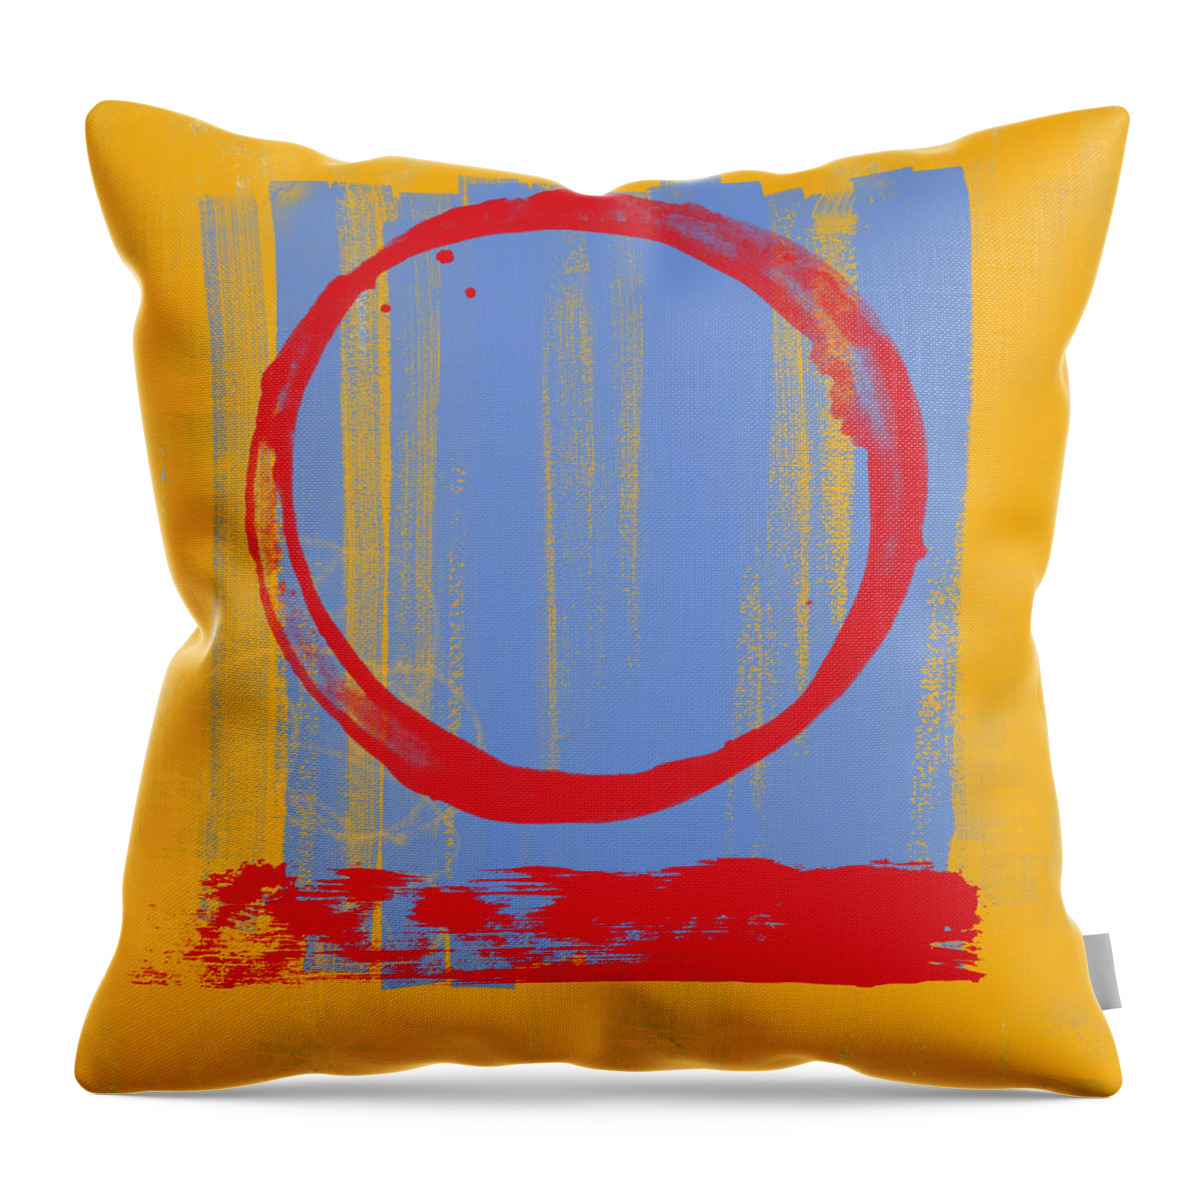 Red Throw Pillow featuring the painting Enso by Julie Niemela